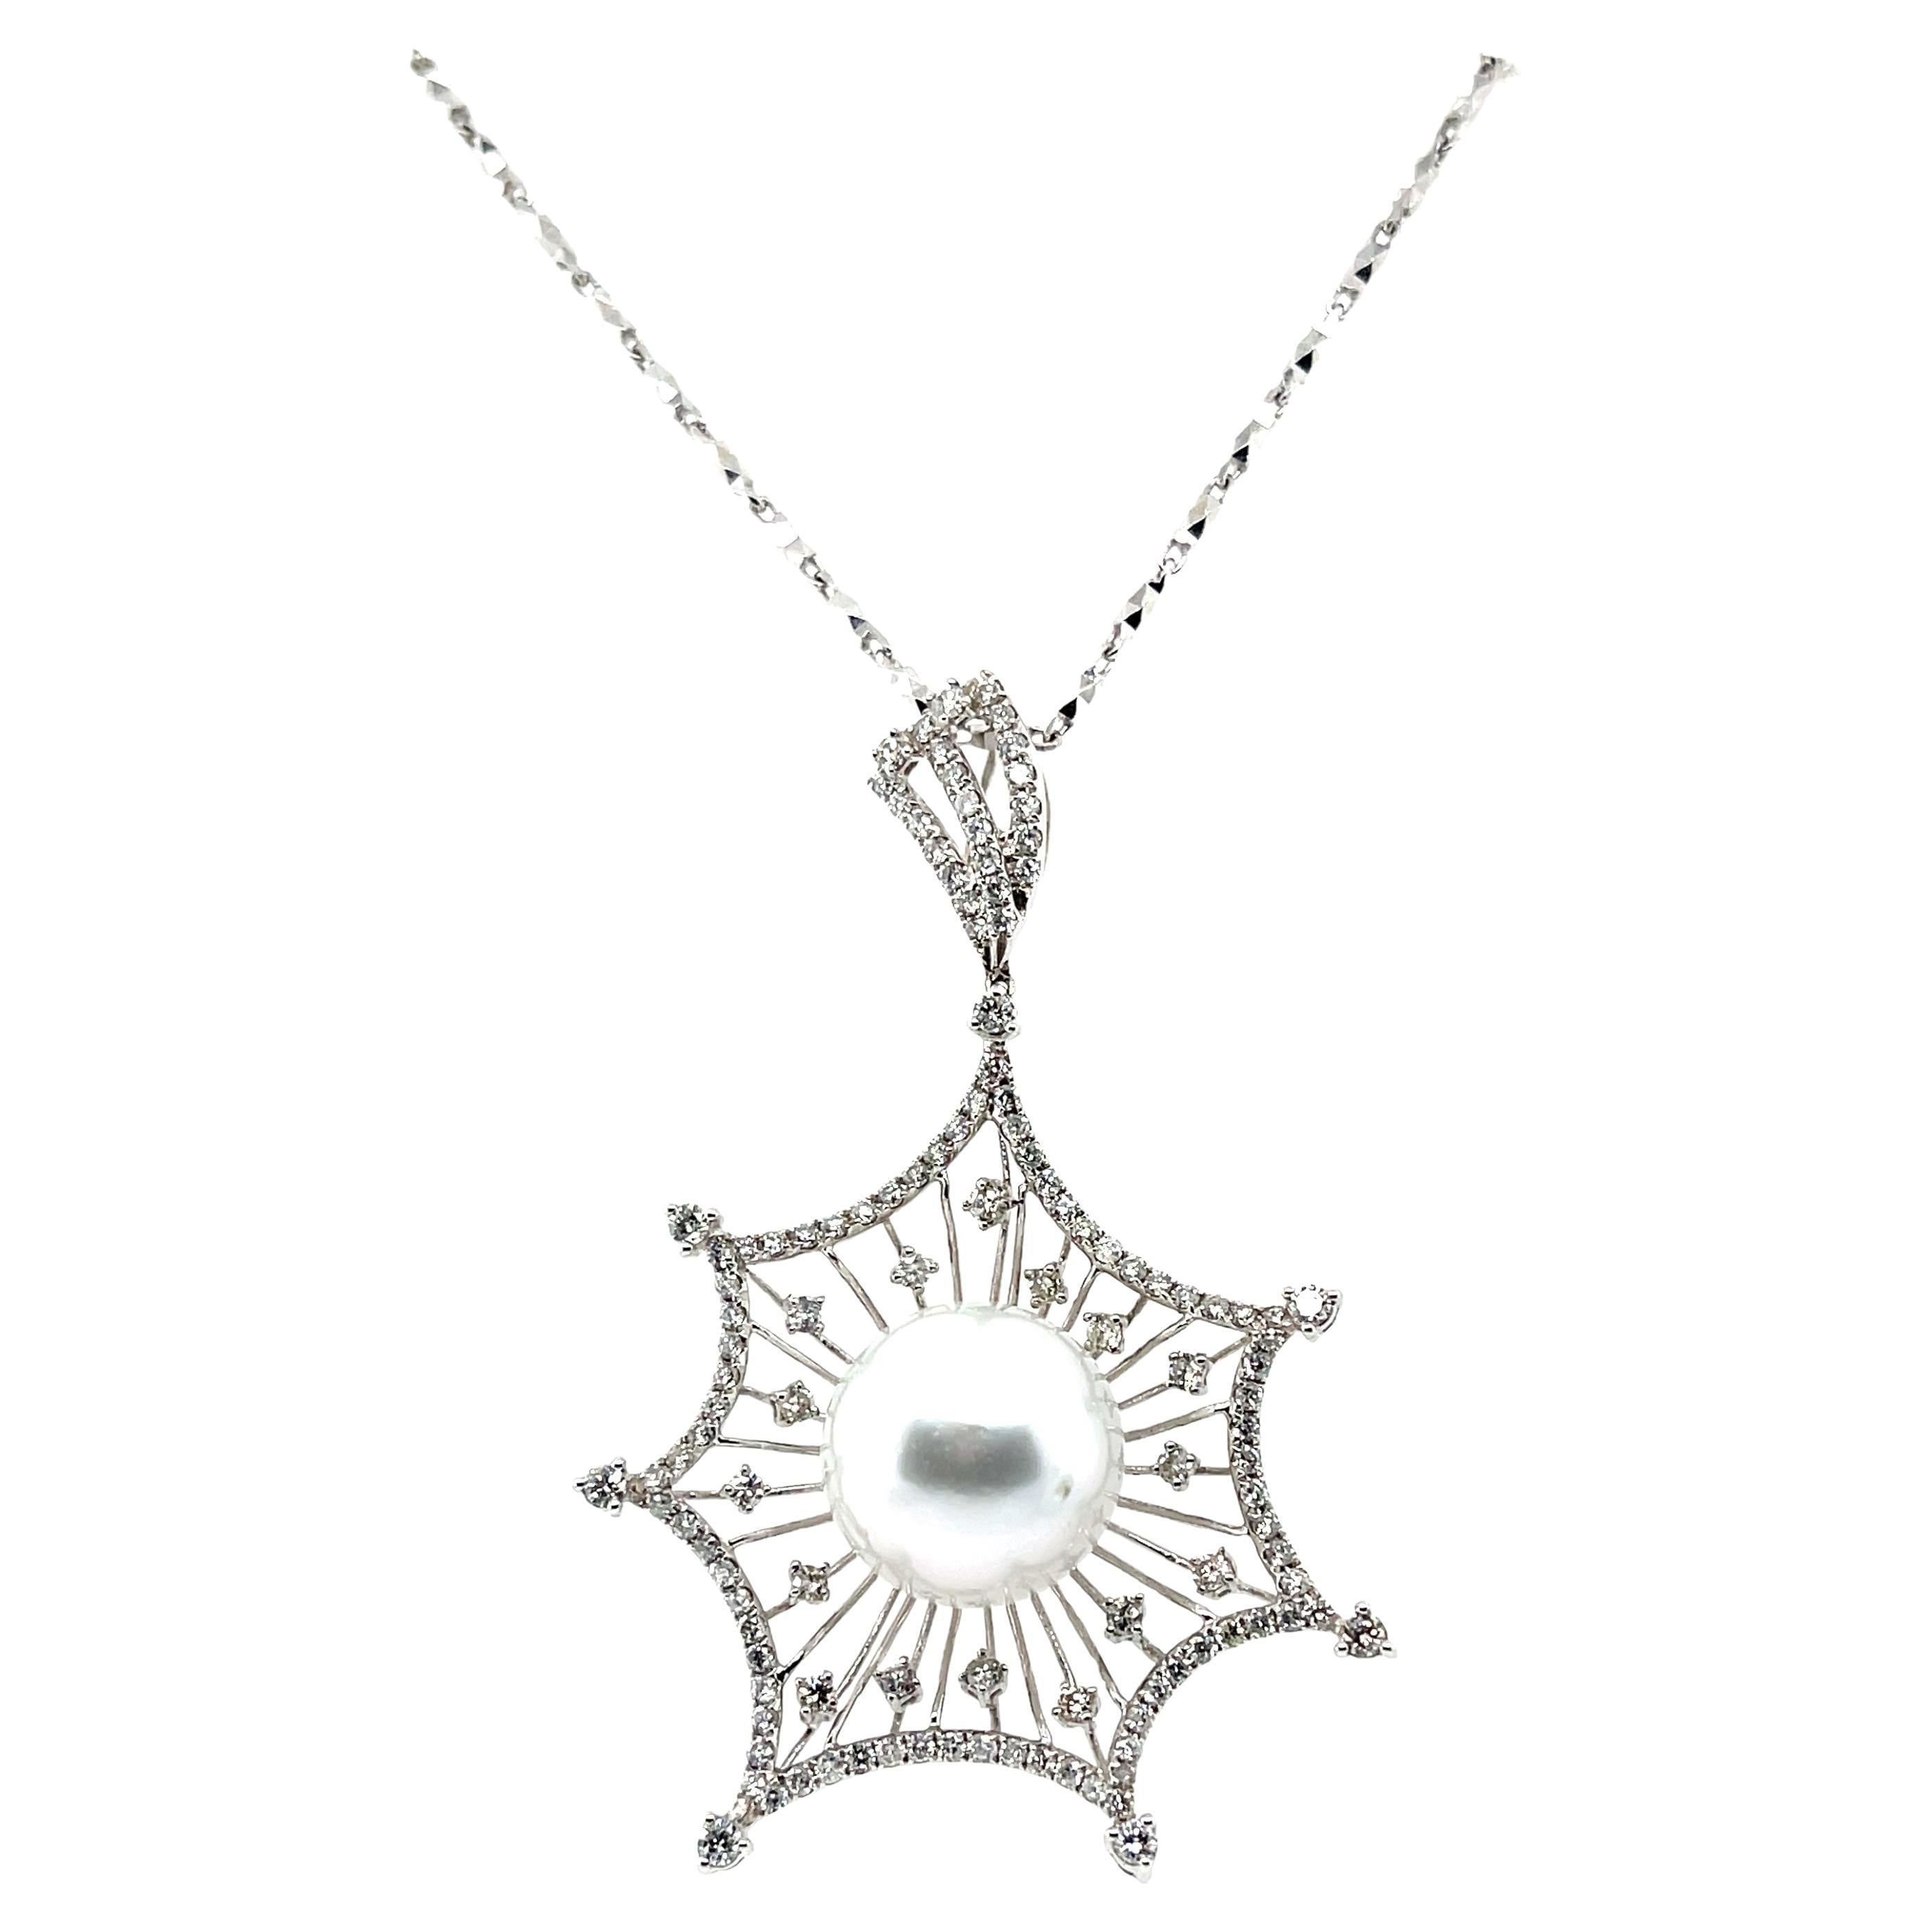 18CT White Gold Diamond and Pearl Necklace and Pendant For Sale